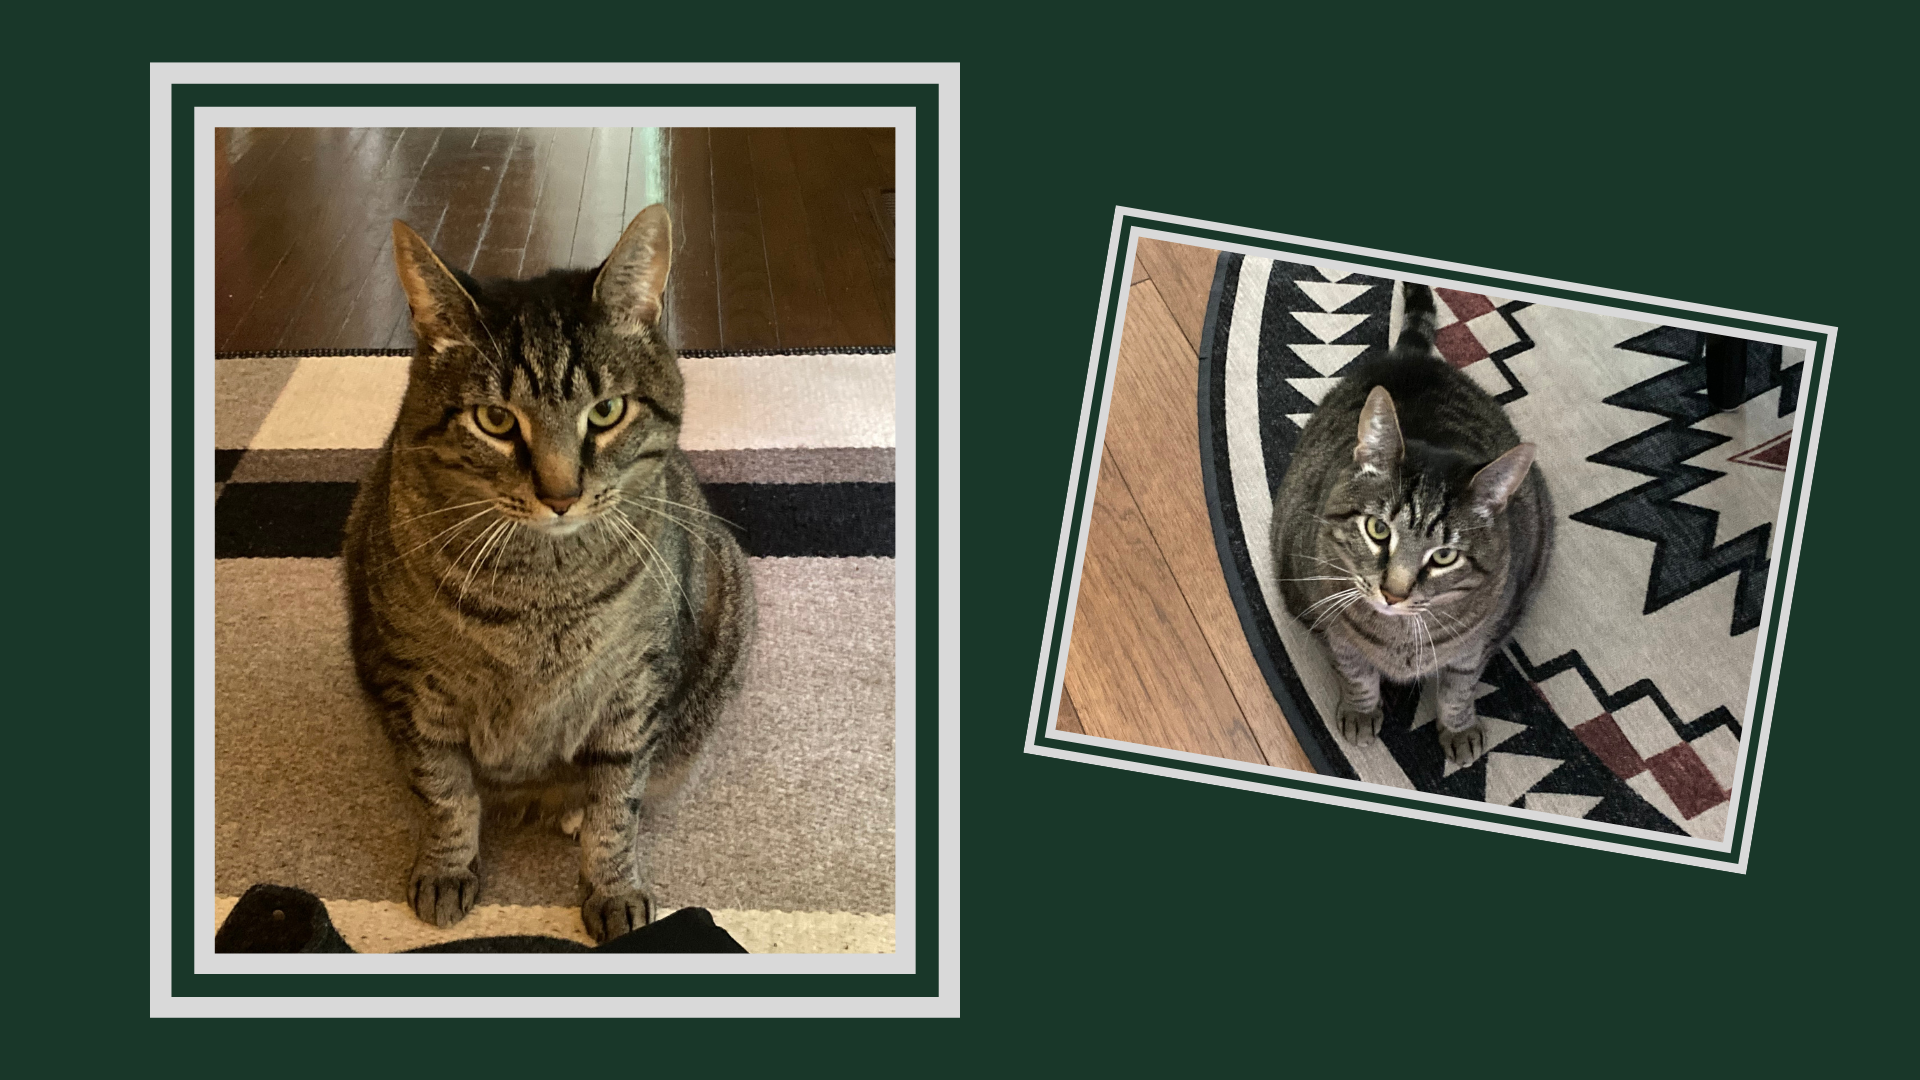 Two photos of a gray-and-black tabby cat sitting on a geometrically patterned rug and looking into the camera sit in light gray frames against a dark green background.